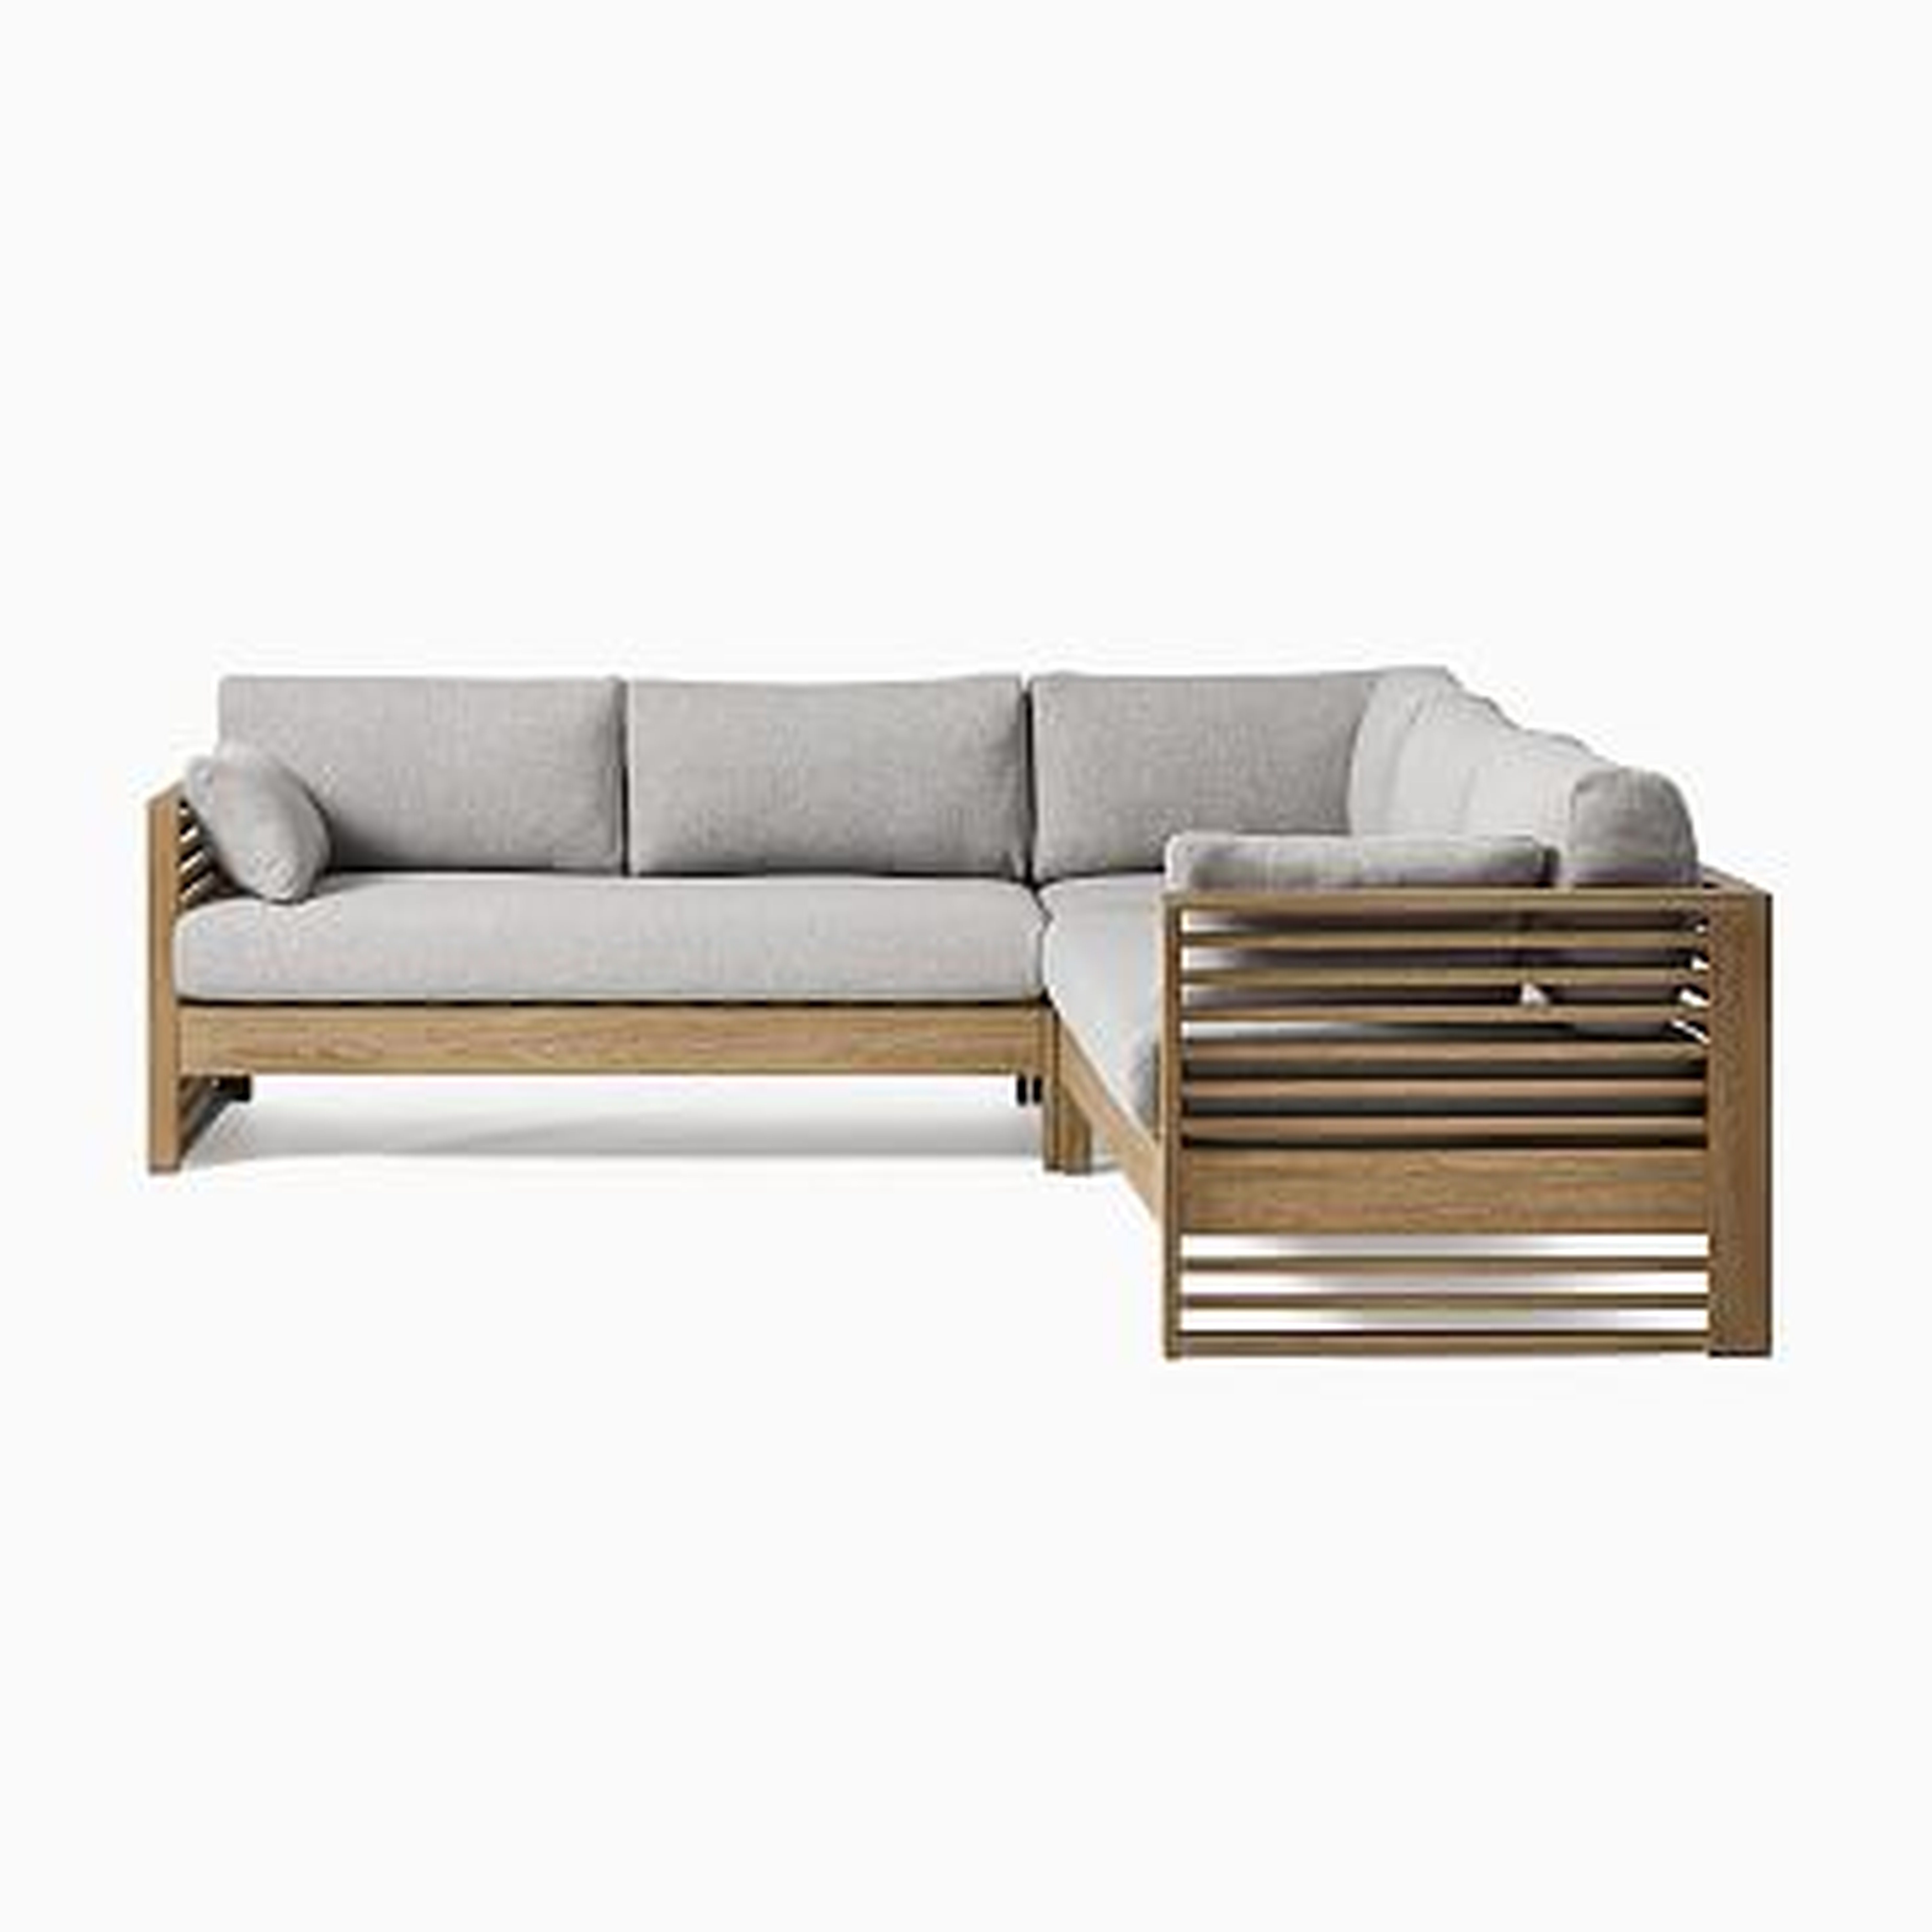 Santa Fe Slatted Outdoor 93 in 3-Piece L-Shaped Sectional, Driftwood - West Elm